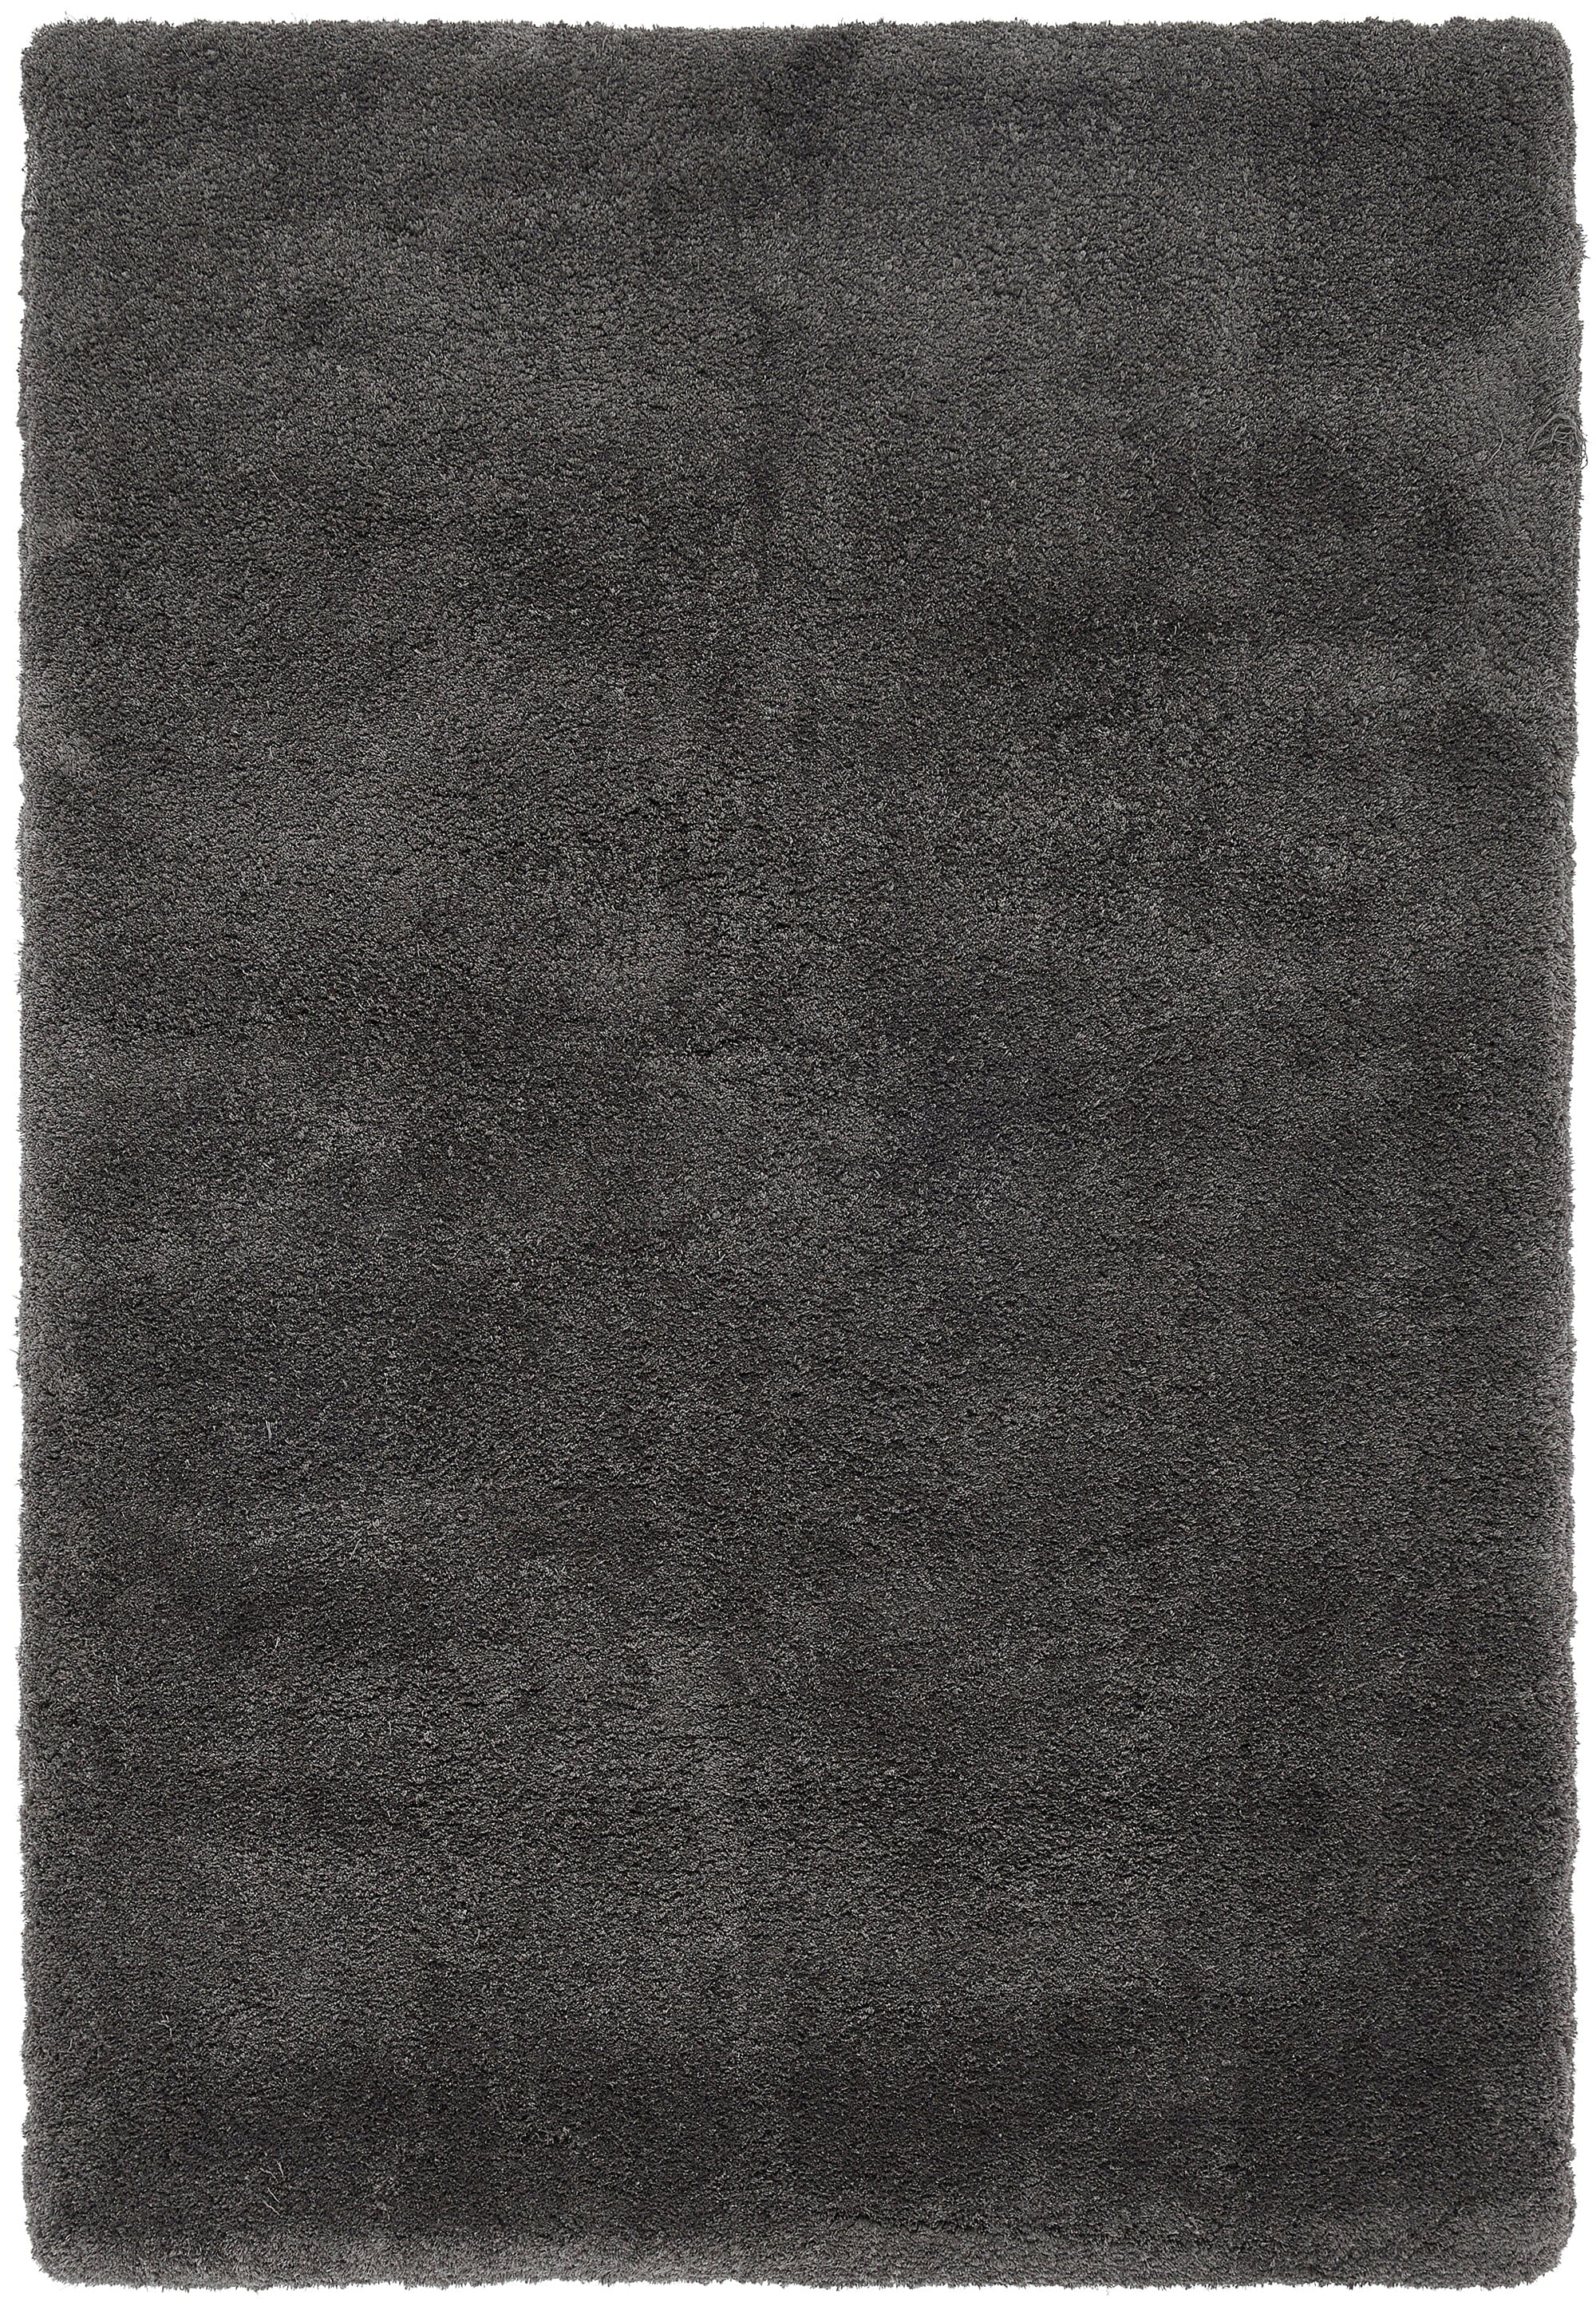 Lulu Charcoal Soft Touch Fluffy Rug